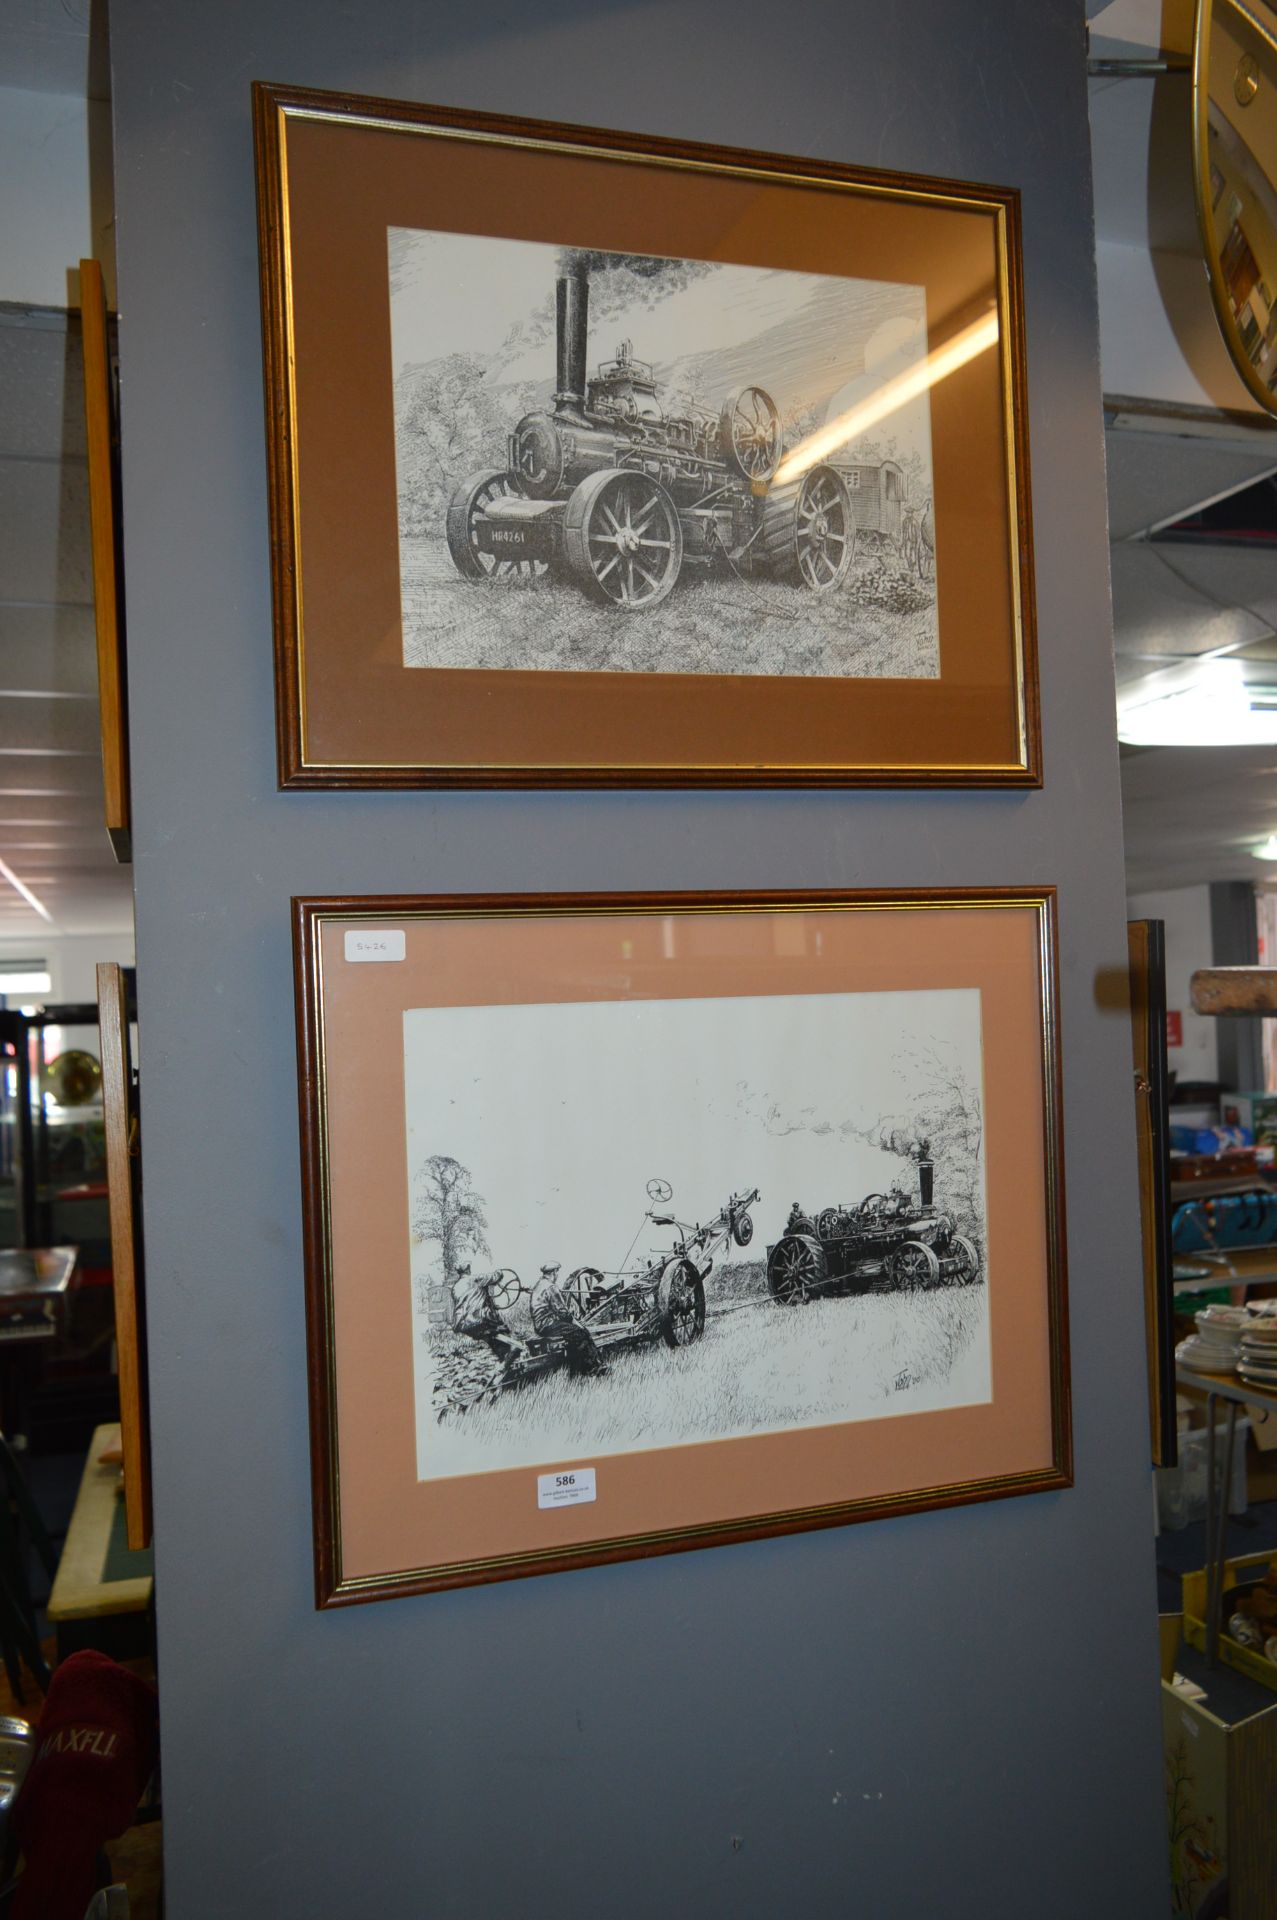 Pair of Framed Monochrome Prints - Steamrollers